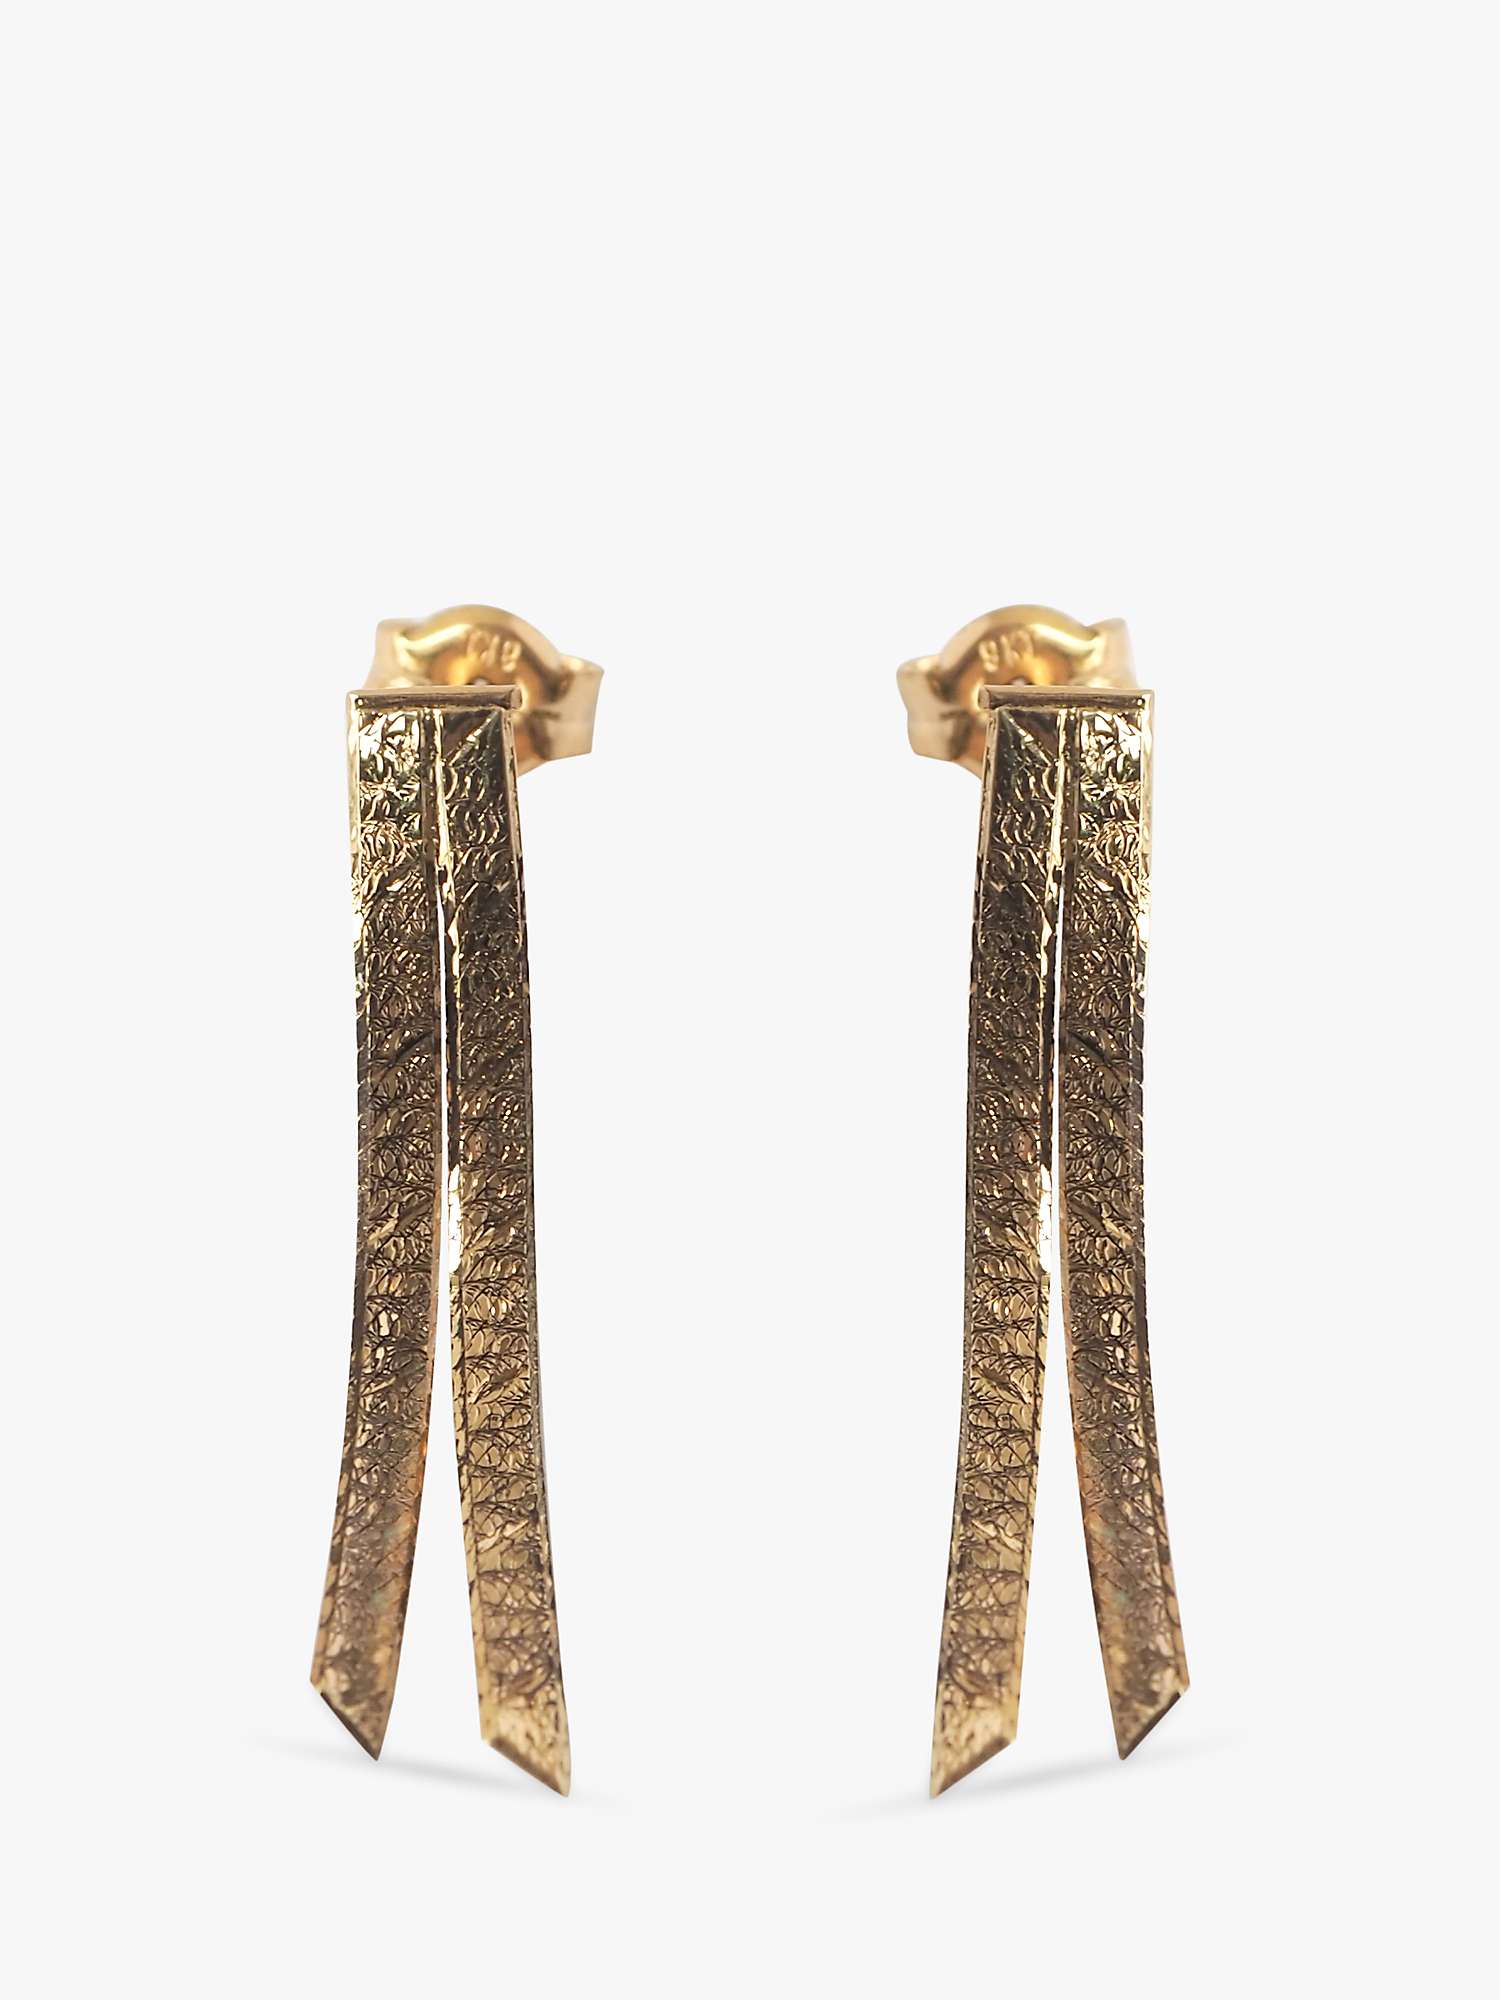 Buy L & T Heirlooms Second Hand 9ct Yellow Gold Strand Drop Earrings, Gold Online at johnlewis.com